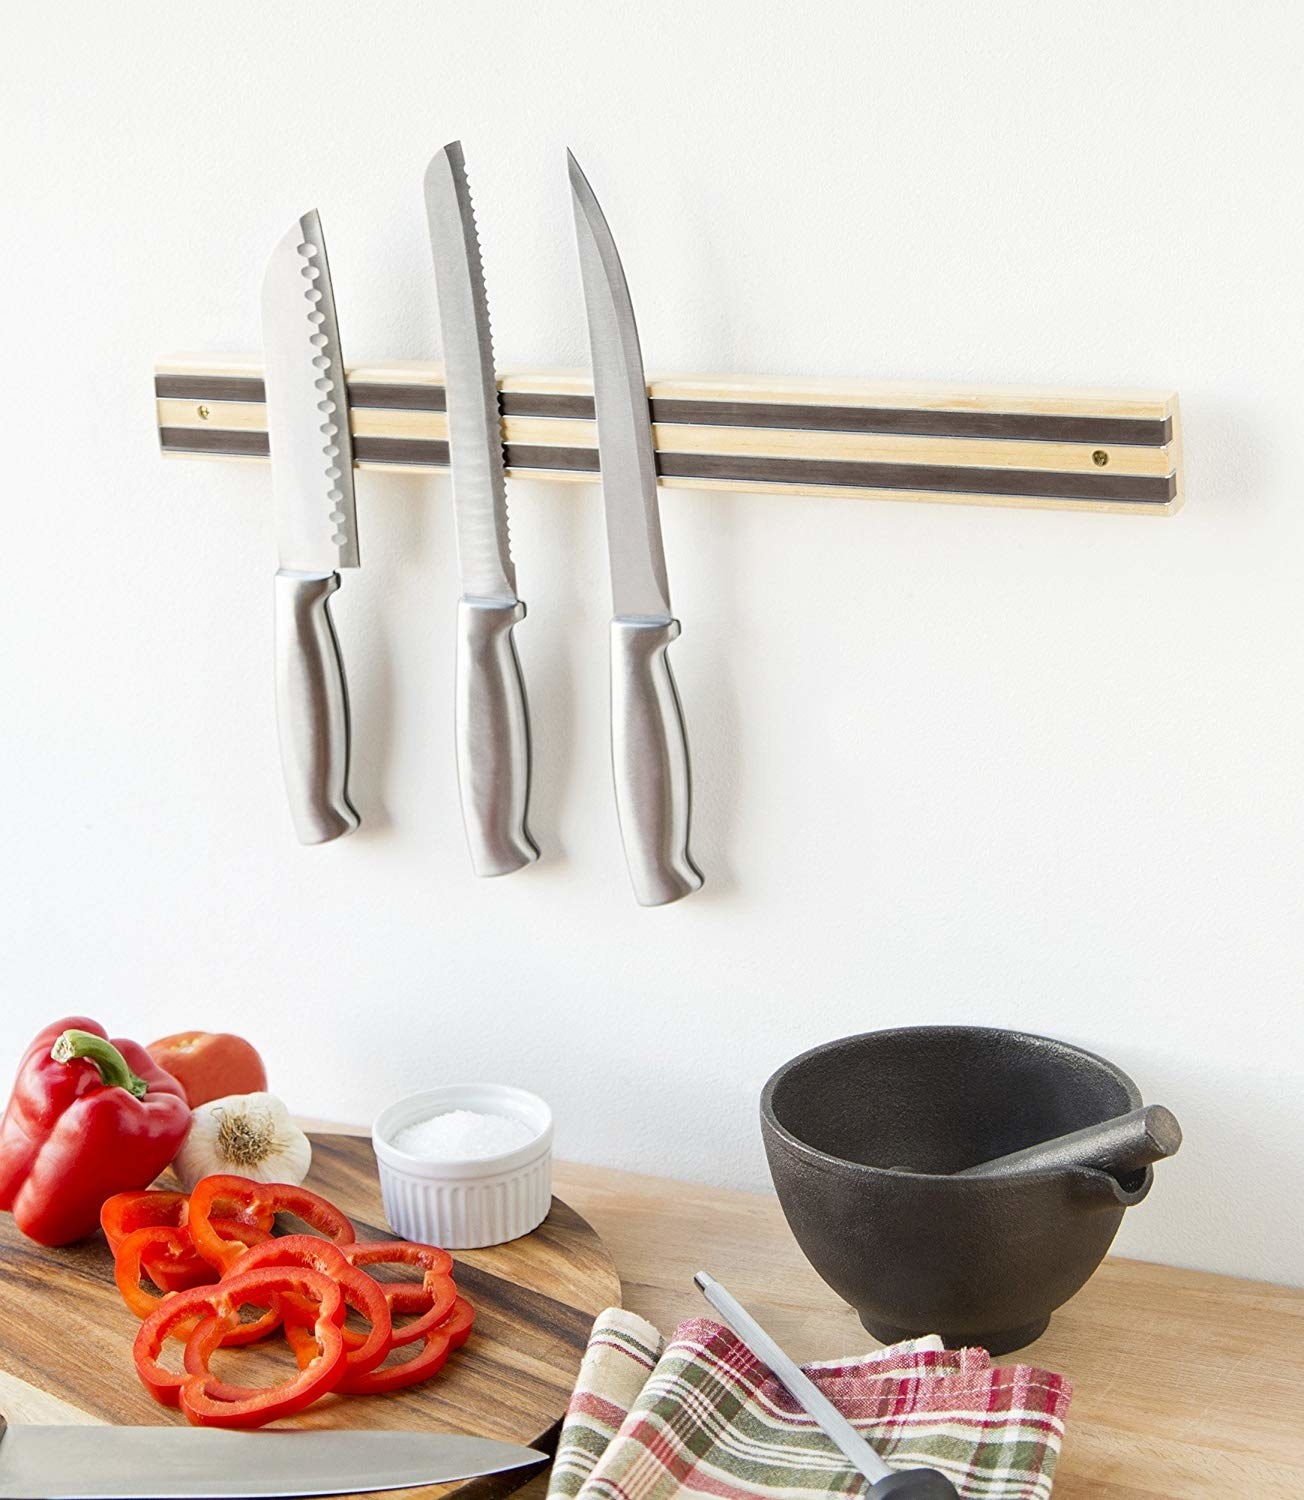 The magnetic rack is mounted on the wall and has three knives attached to it